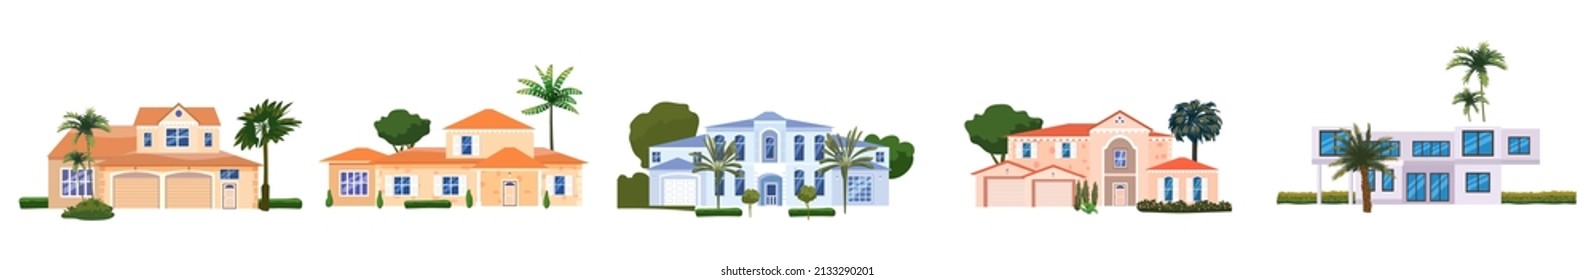 Set Mansion Residential Home Buildings, tropic trees, palms. House exterior facades front view architecture family modern contemporary cottages houses or apartments, villa. Suburban property